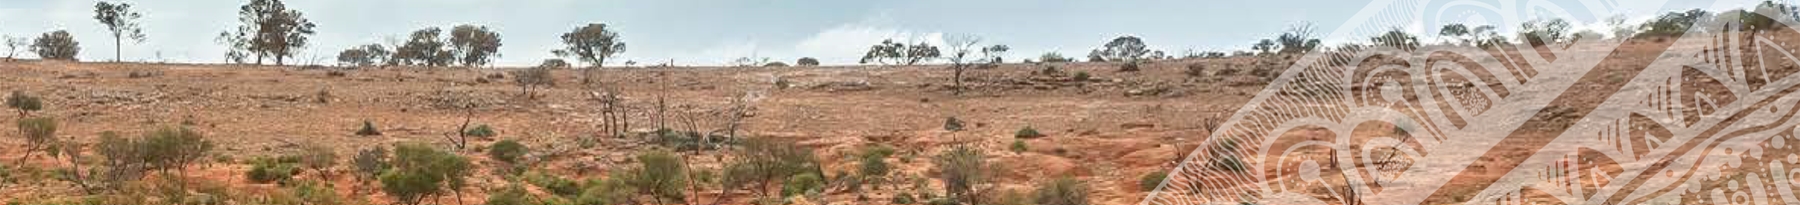 view of red desert with scattered shrubs and small trees